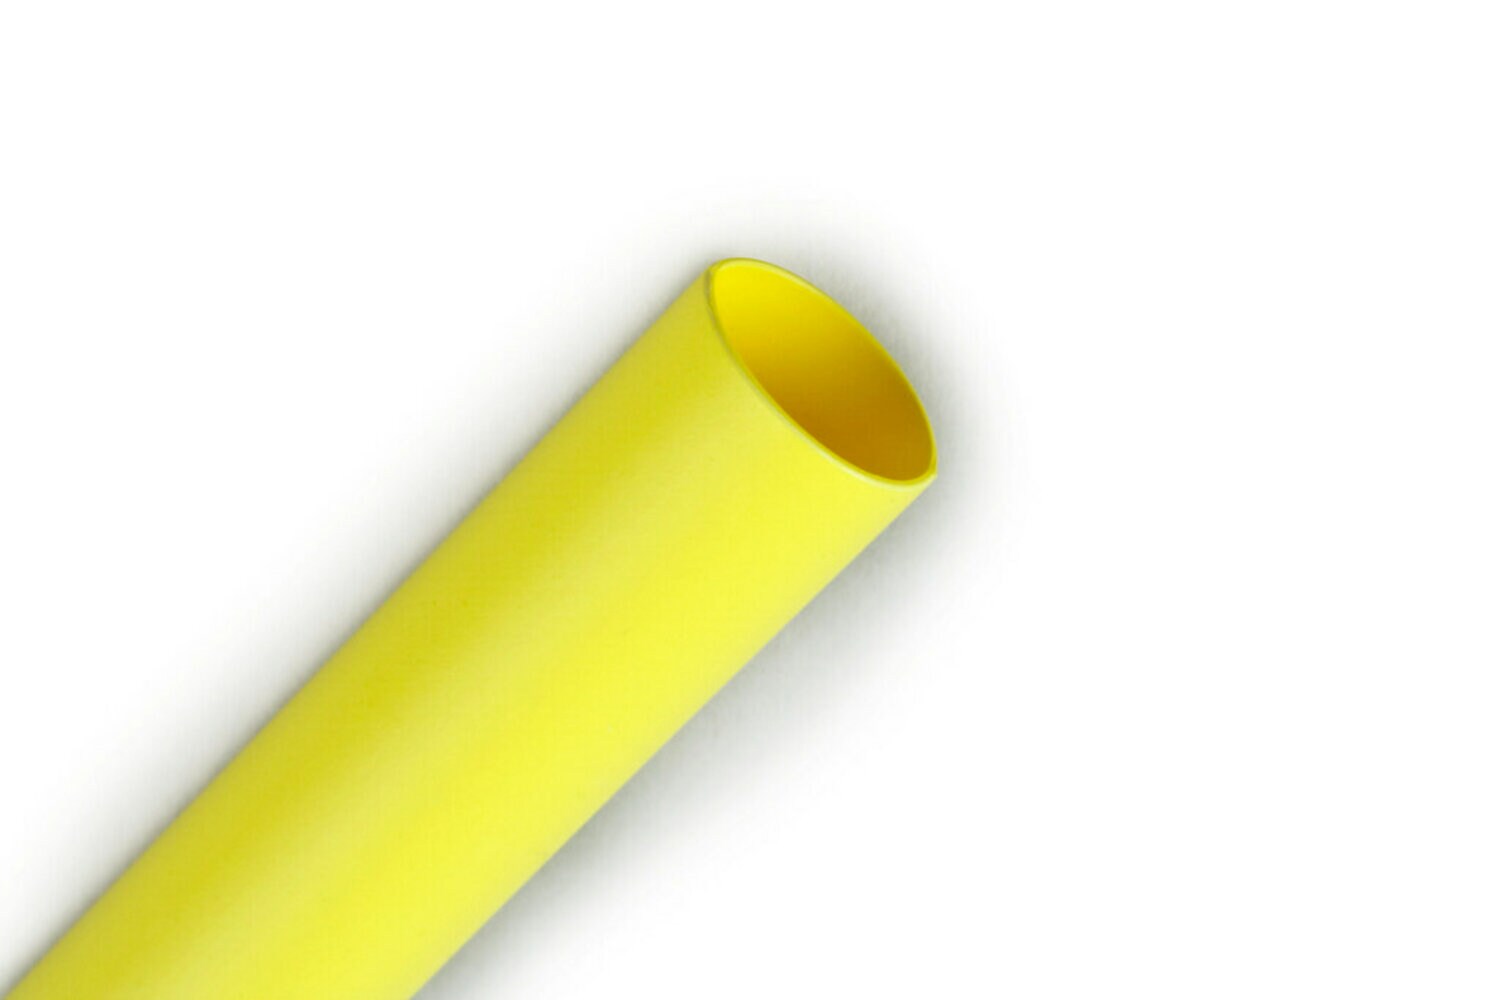 7010396217 - 3M Heat Shrink Thin-Wall Tubing FP-301-1/4-Yellow-200`: 200 ft spool
length, 600 ft/case